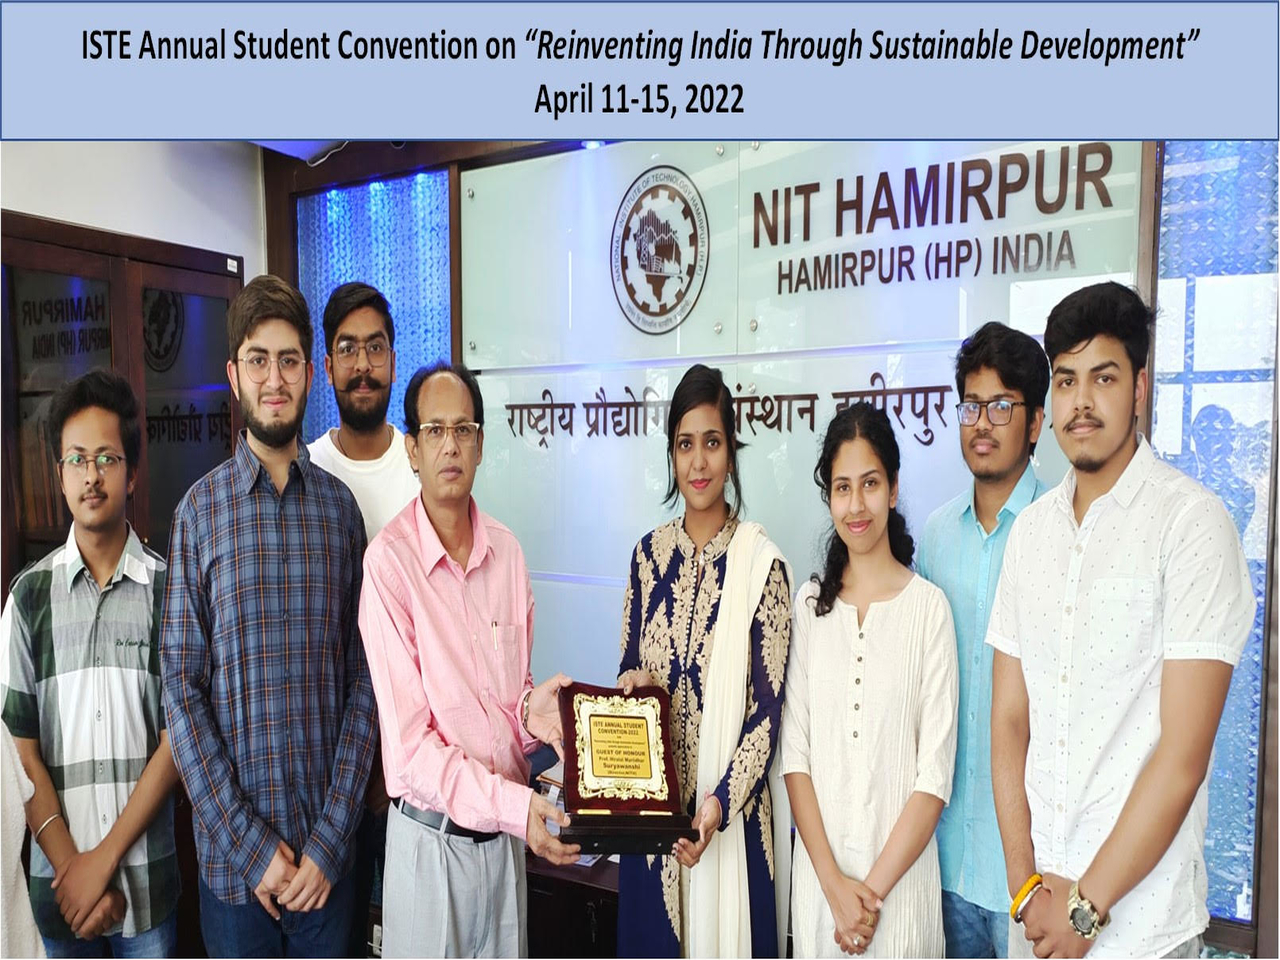 ISTE Annual Student Convention on "Reinventing India Through Sustainable Development April 11-15,2022"